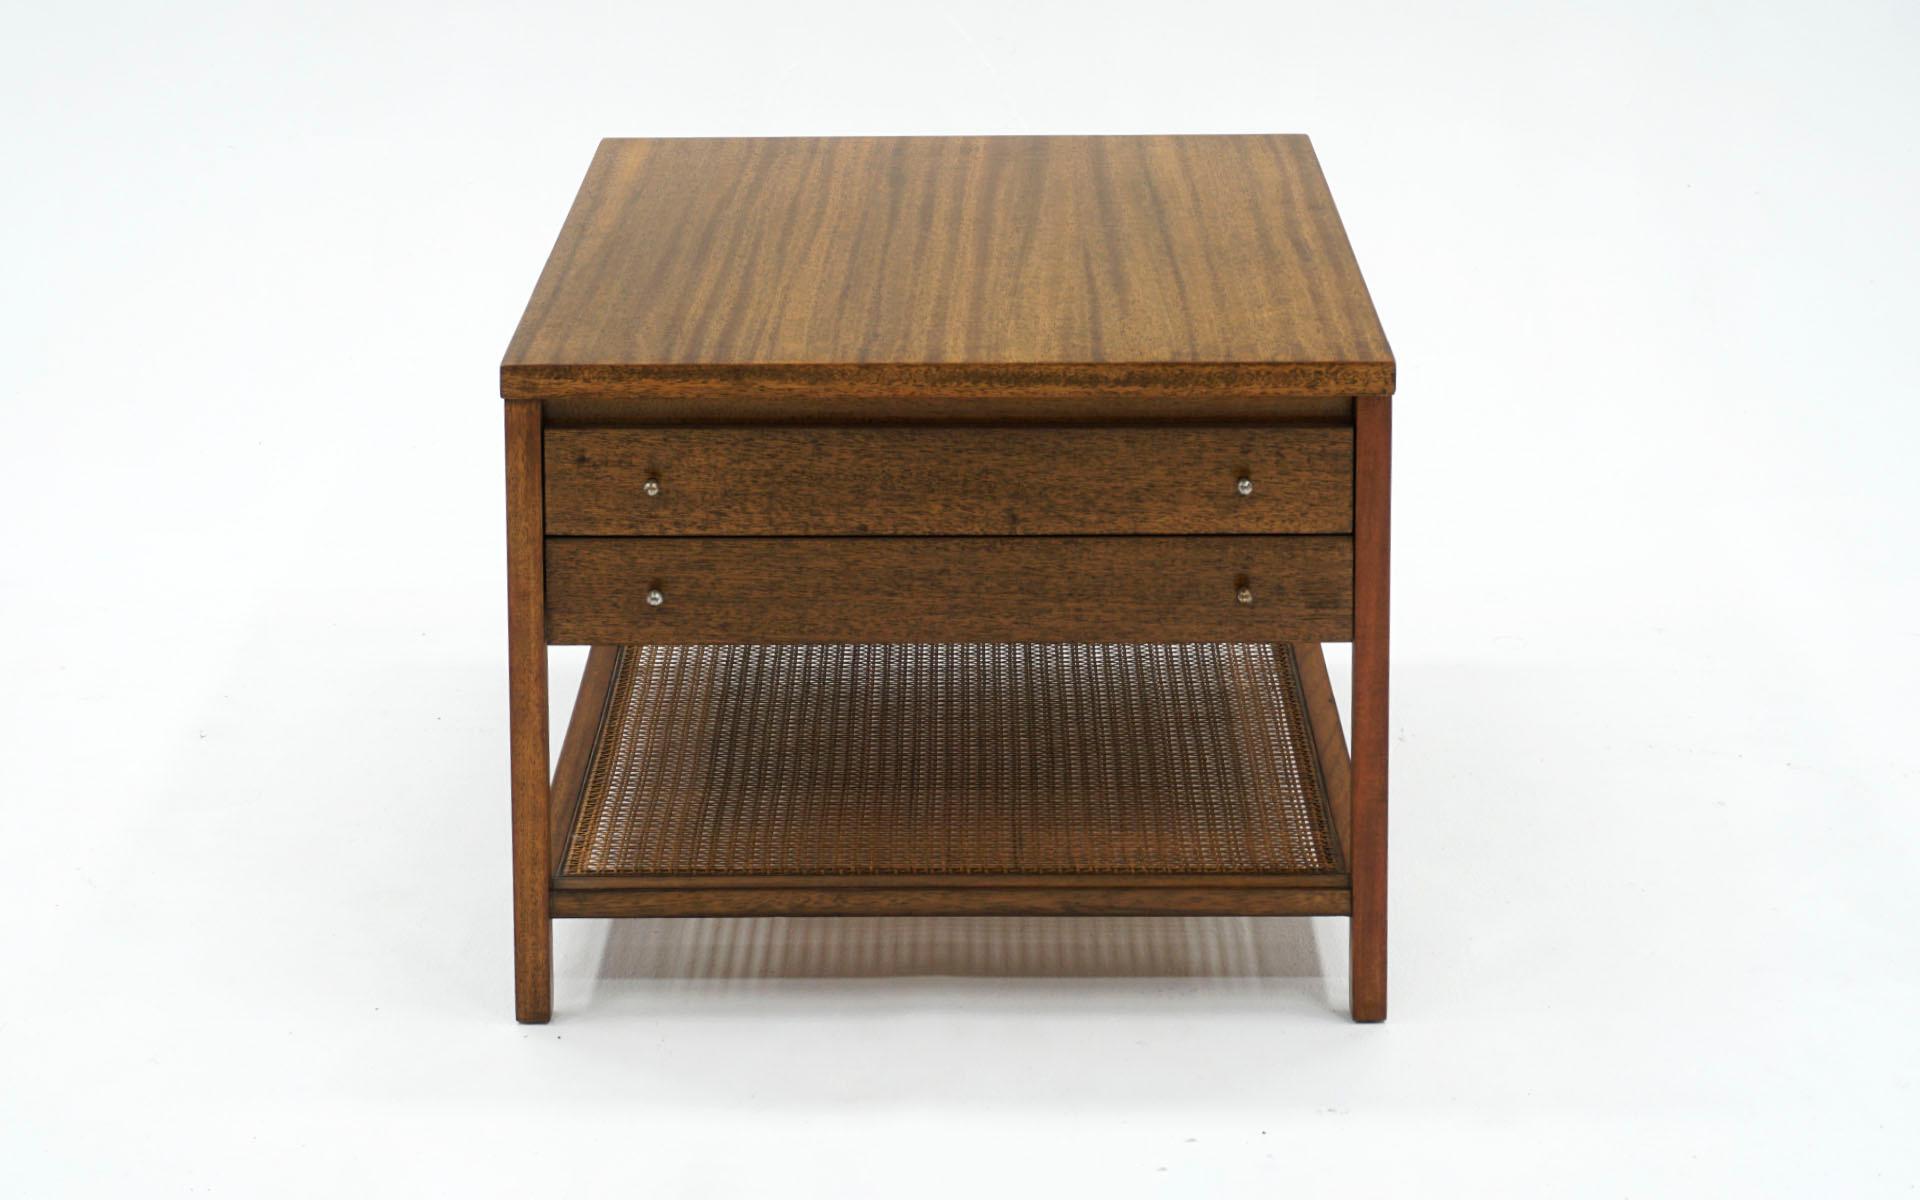 Night stand / side table / end table designed by Paul McCobb for Calvin. Almost square rectangle in a beautiful striped mahogany case with two drawers that function smoothly and lower shelf in cane. Retains the original pulls. No breaks or repairs